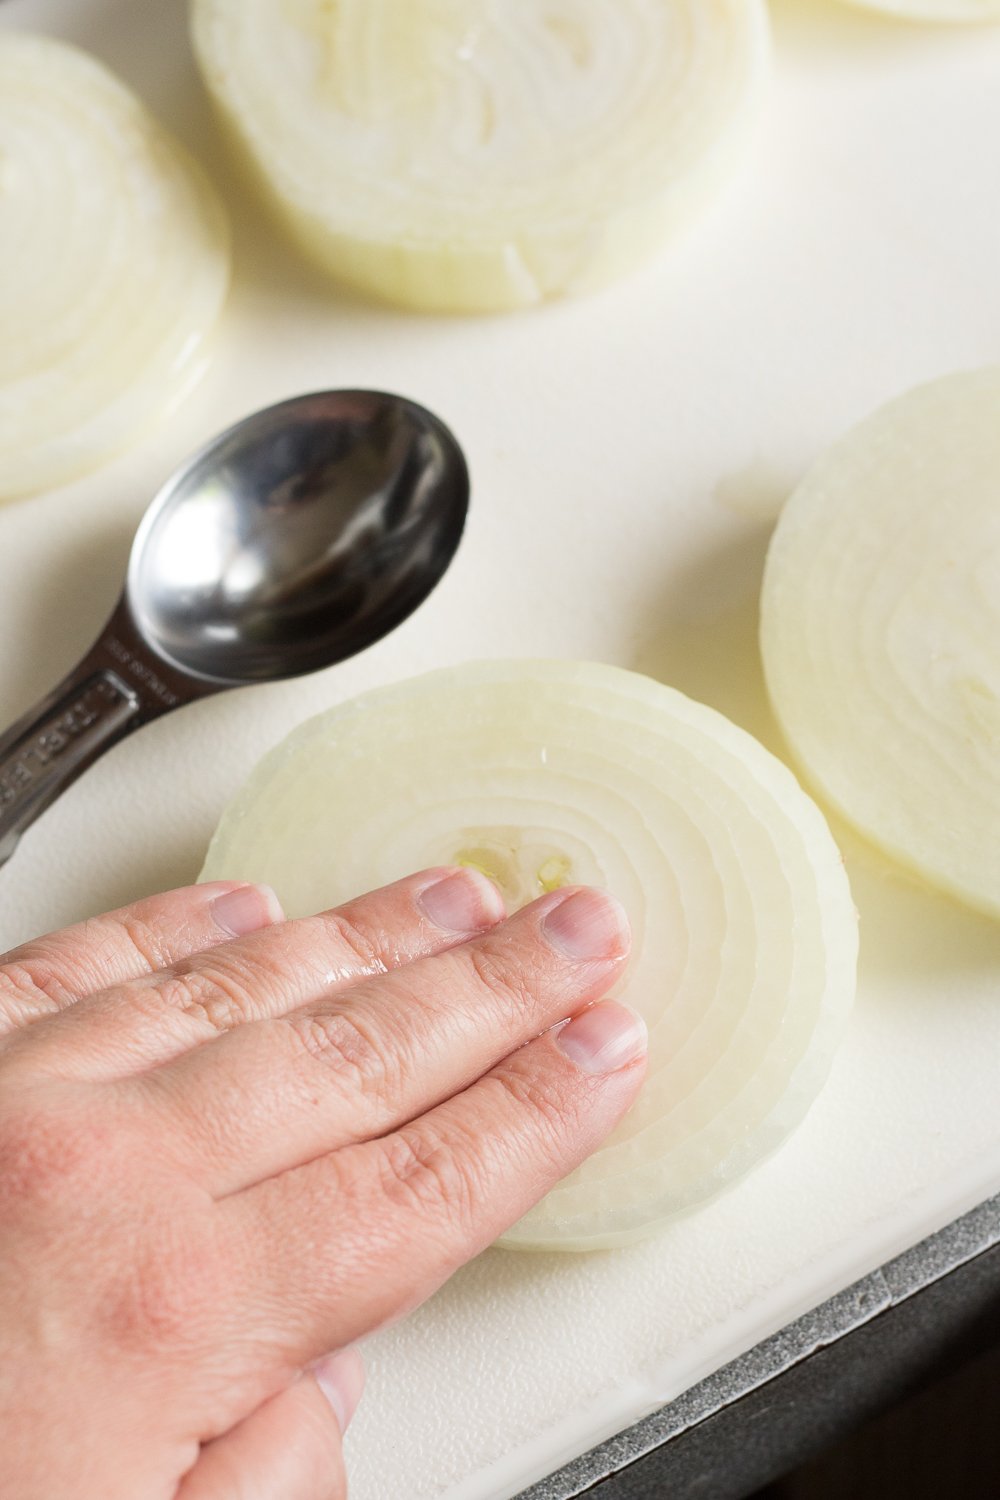 A hand rubbing oil into a large slice of onion on a white cutting board.